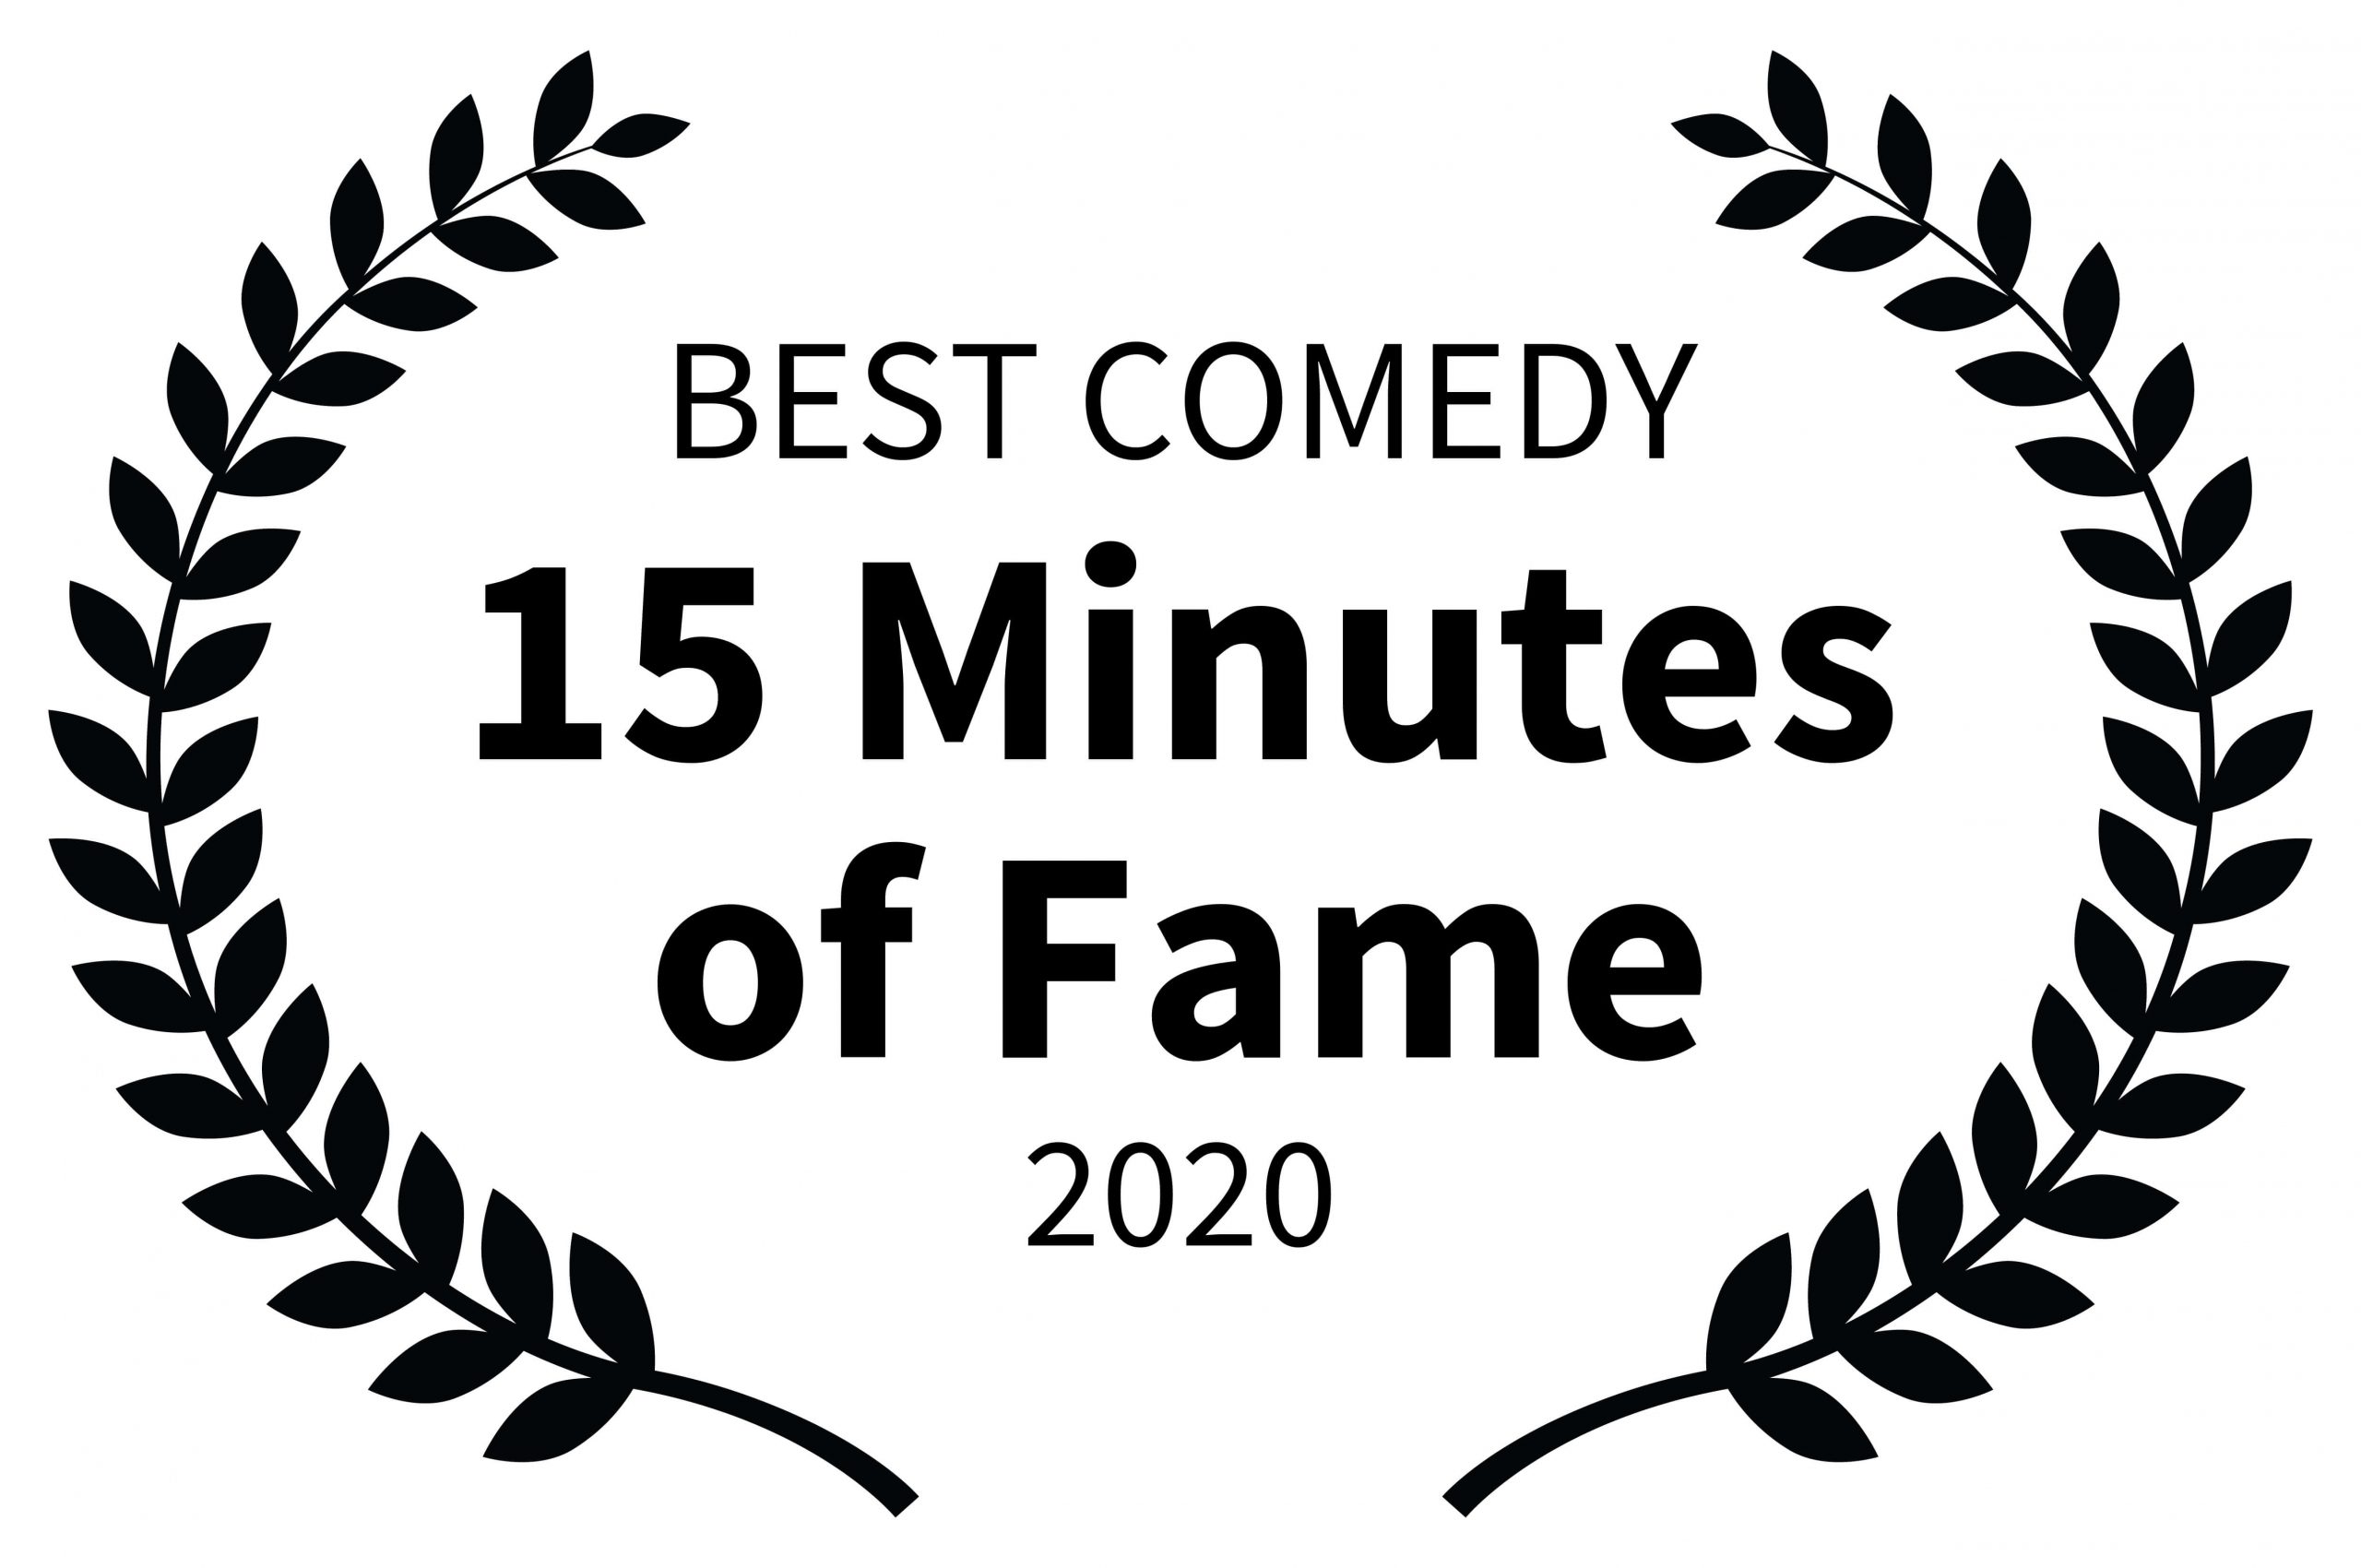 BEST COMEDY - 15 MINUTES FAME 2020